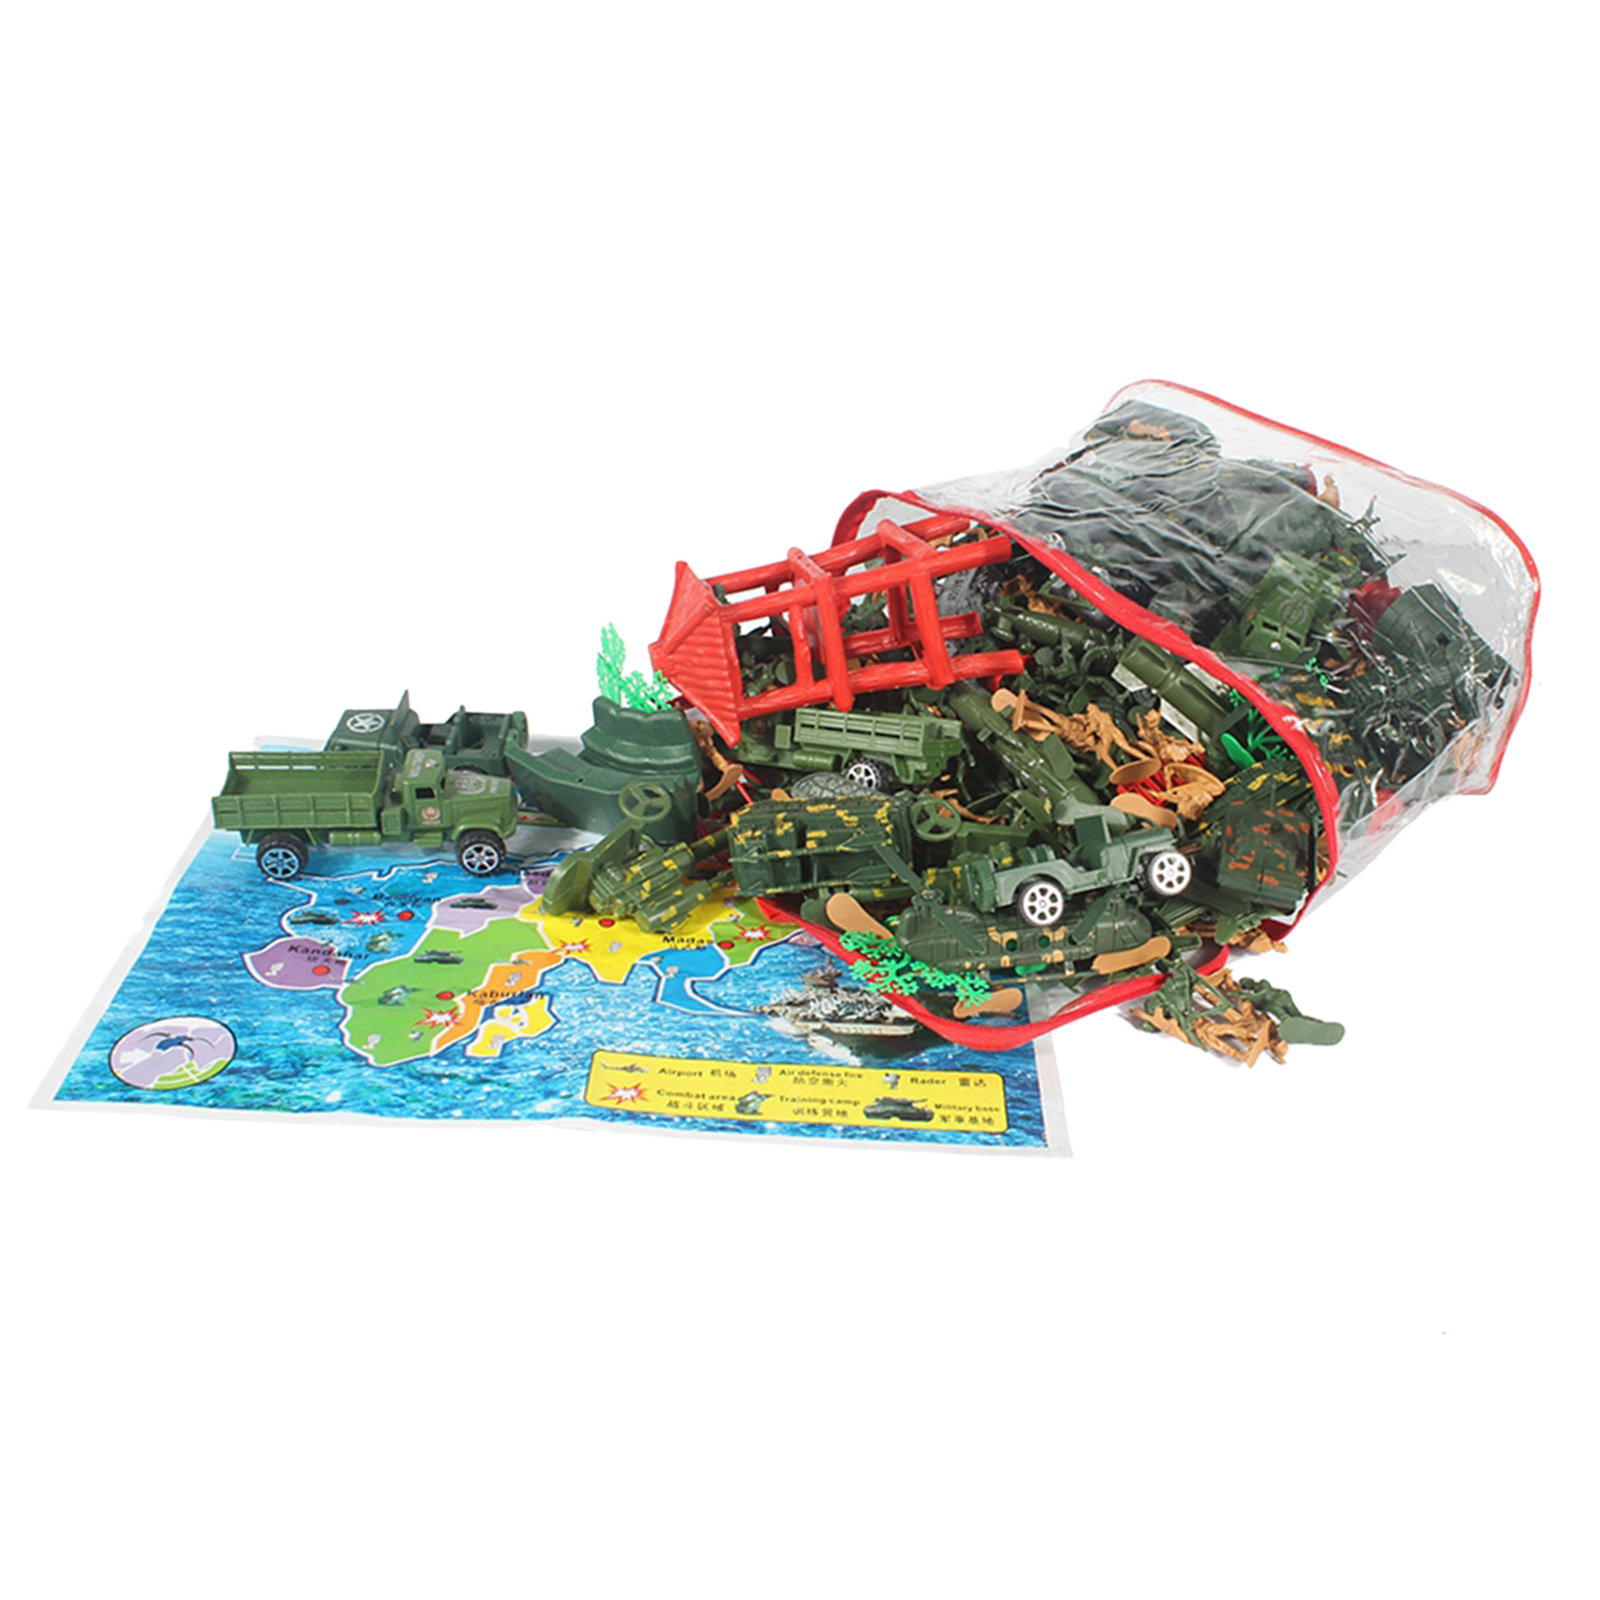 Army Men Play Set Mini Action Figure with Soldiers Toys Pretend Play Gifts